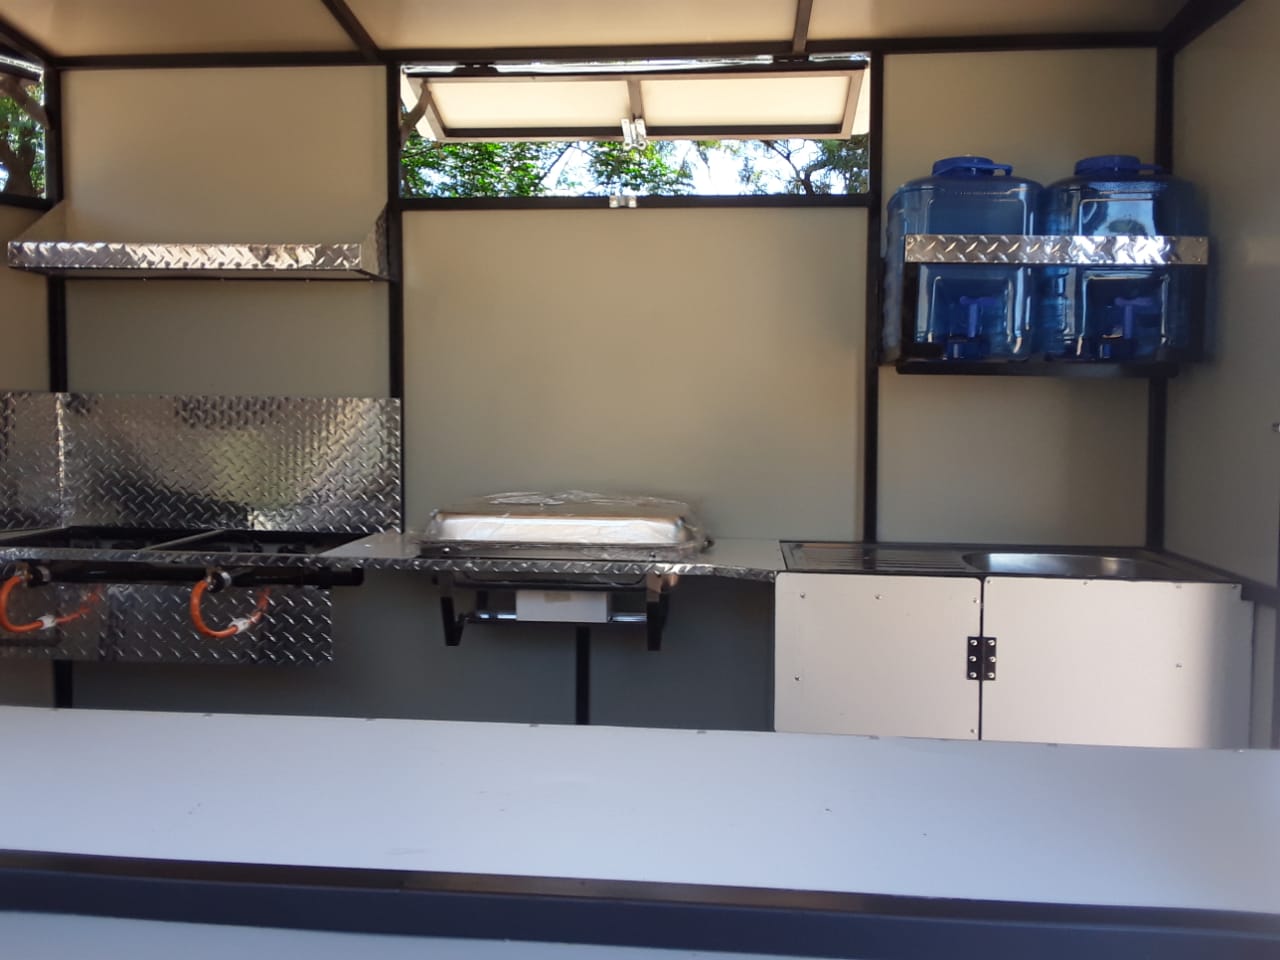 We fabricate mobile kitchens